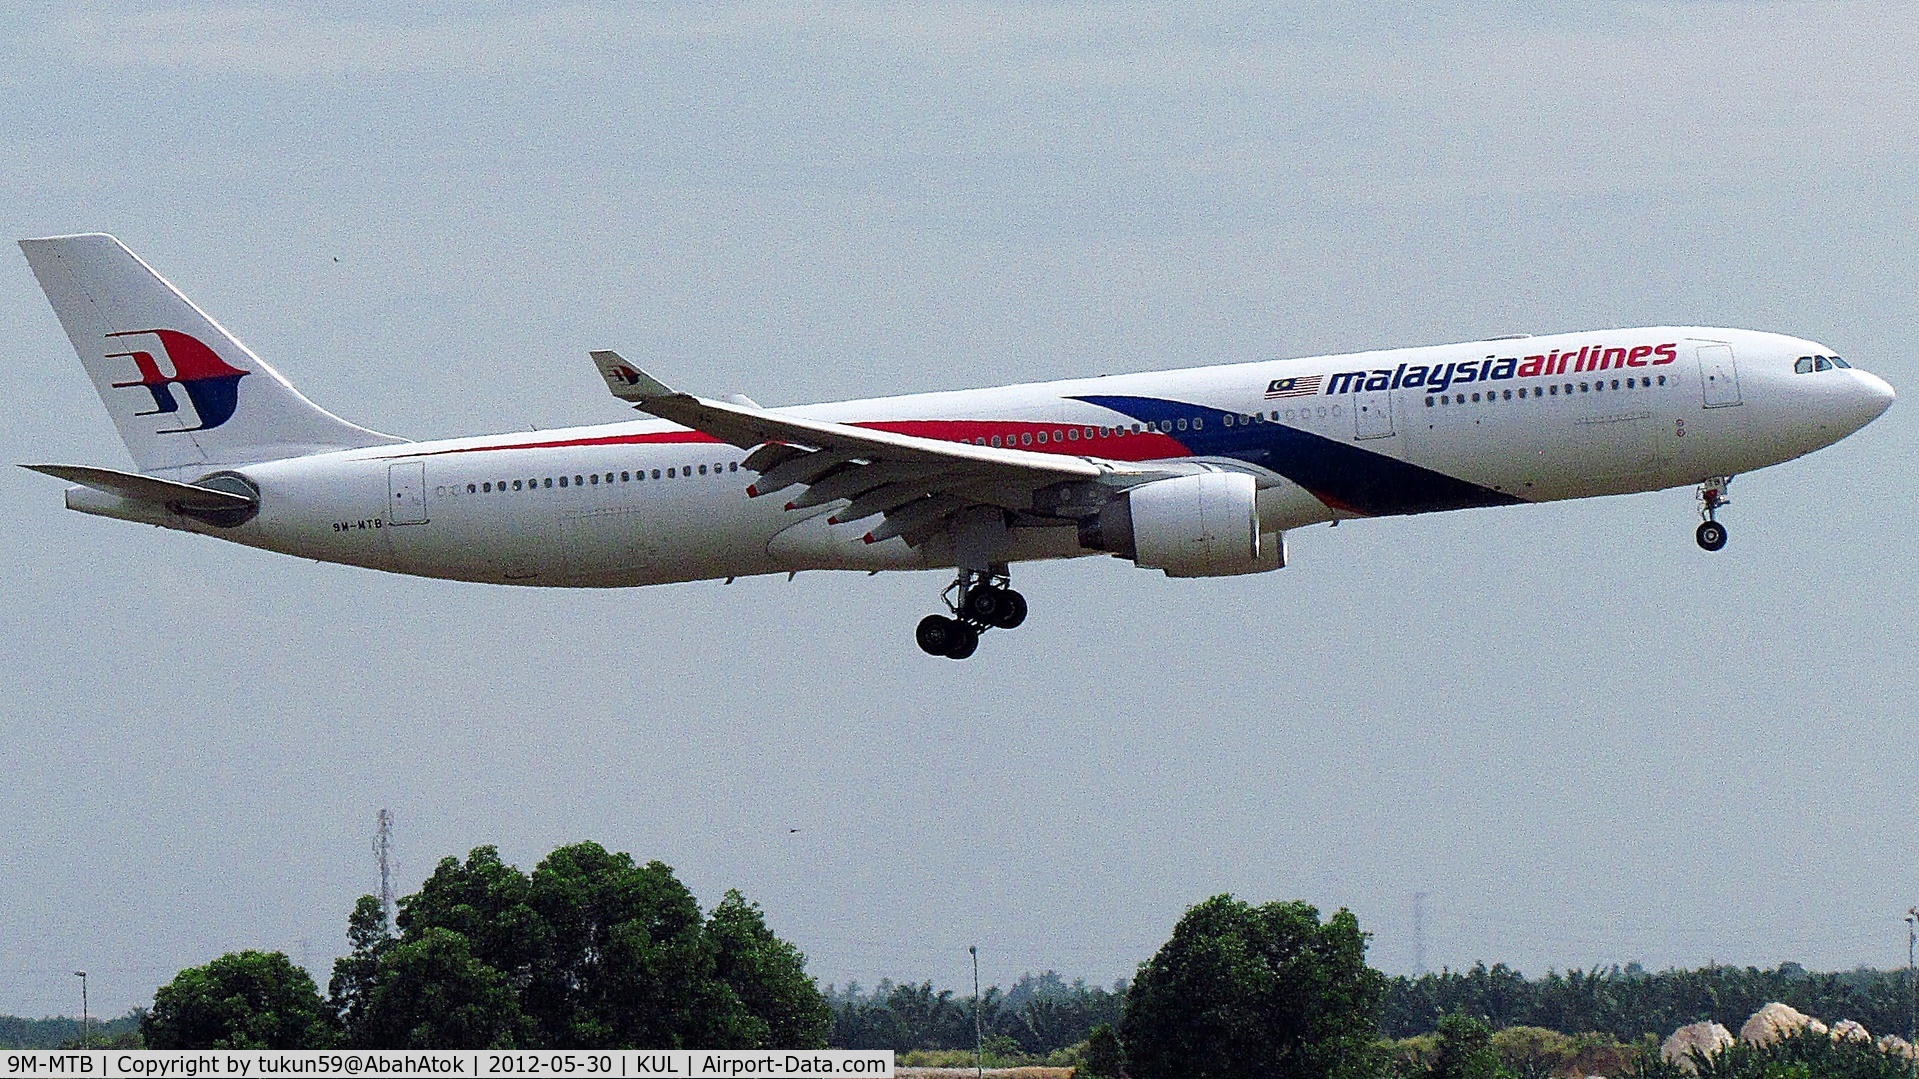 9M-MTB, 2006 Airbus A330-323X C/N 1219, Malaysia Airlines